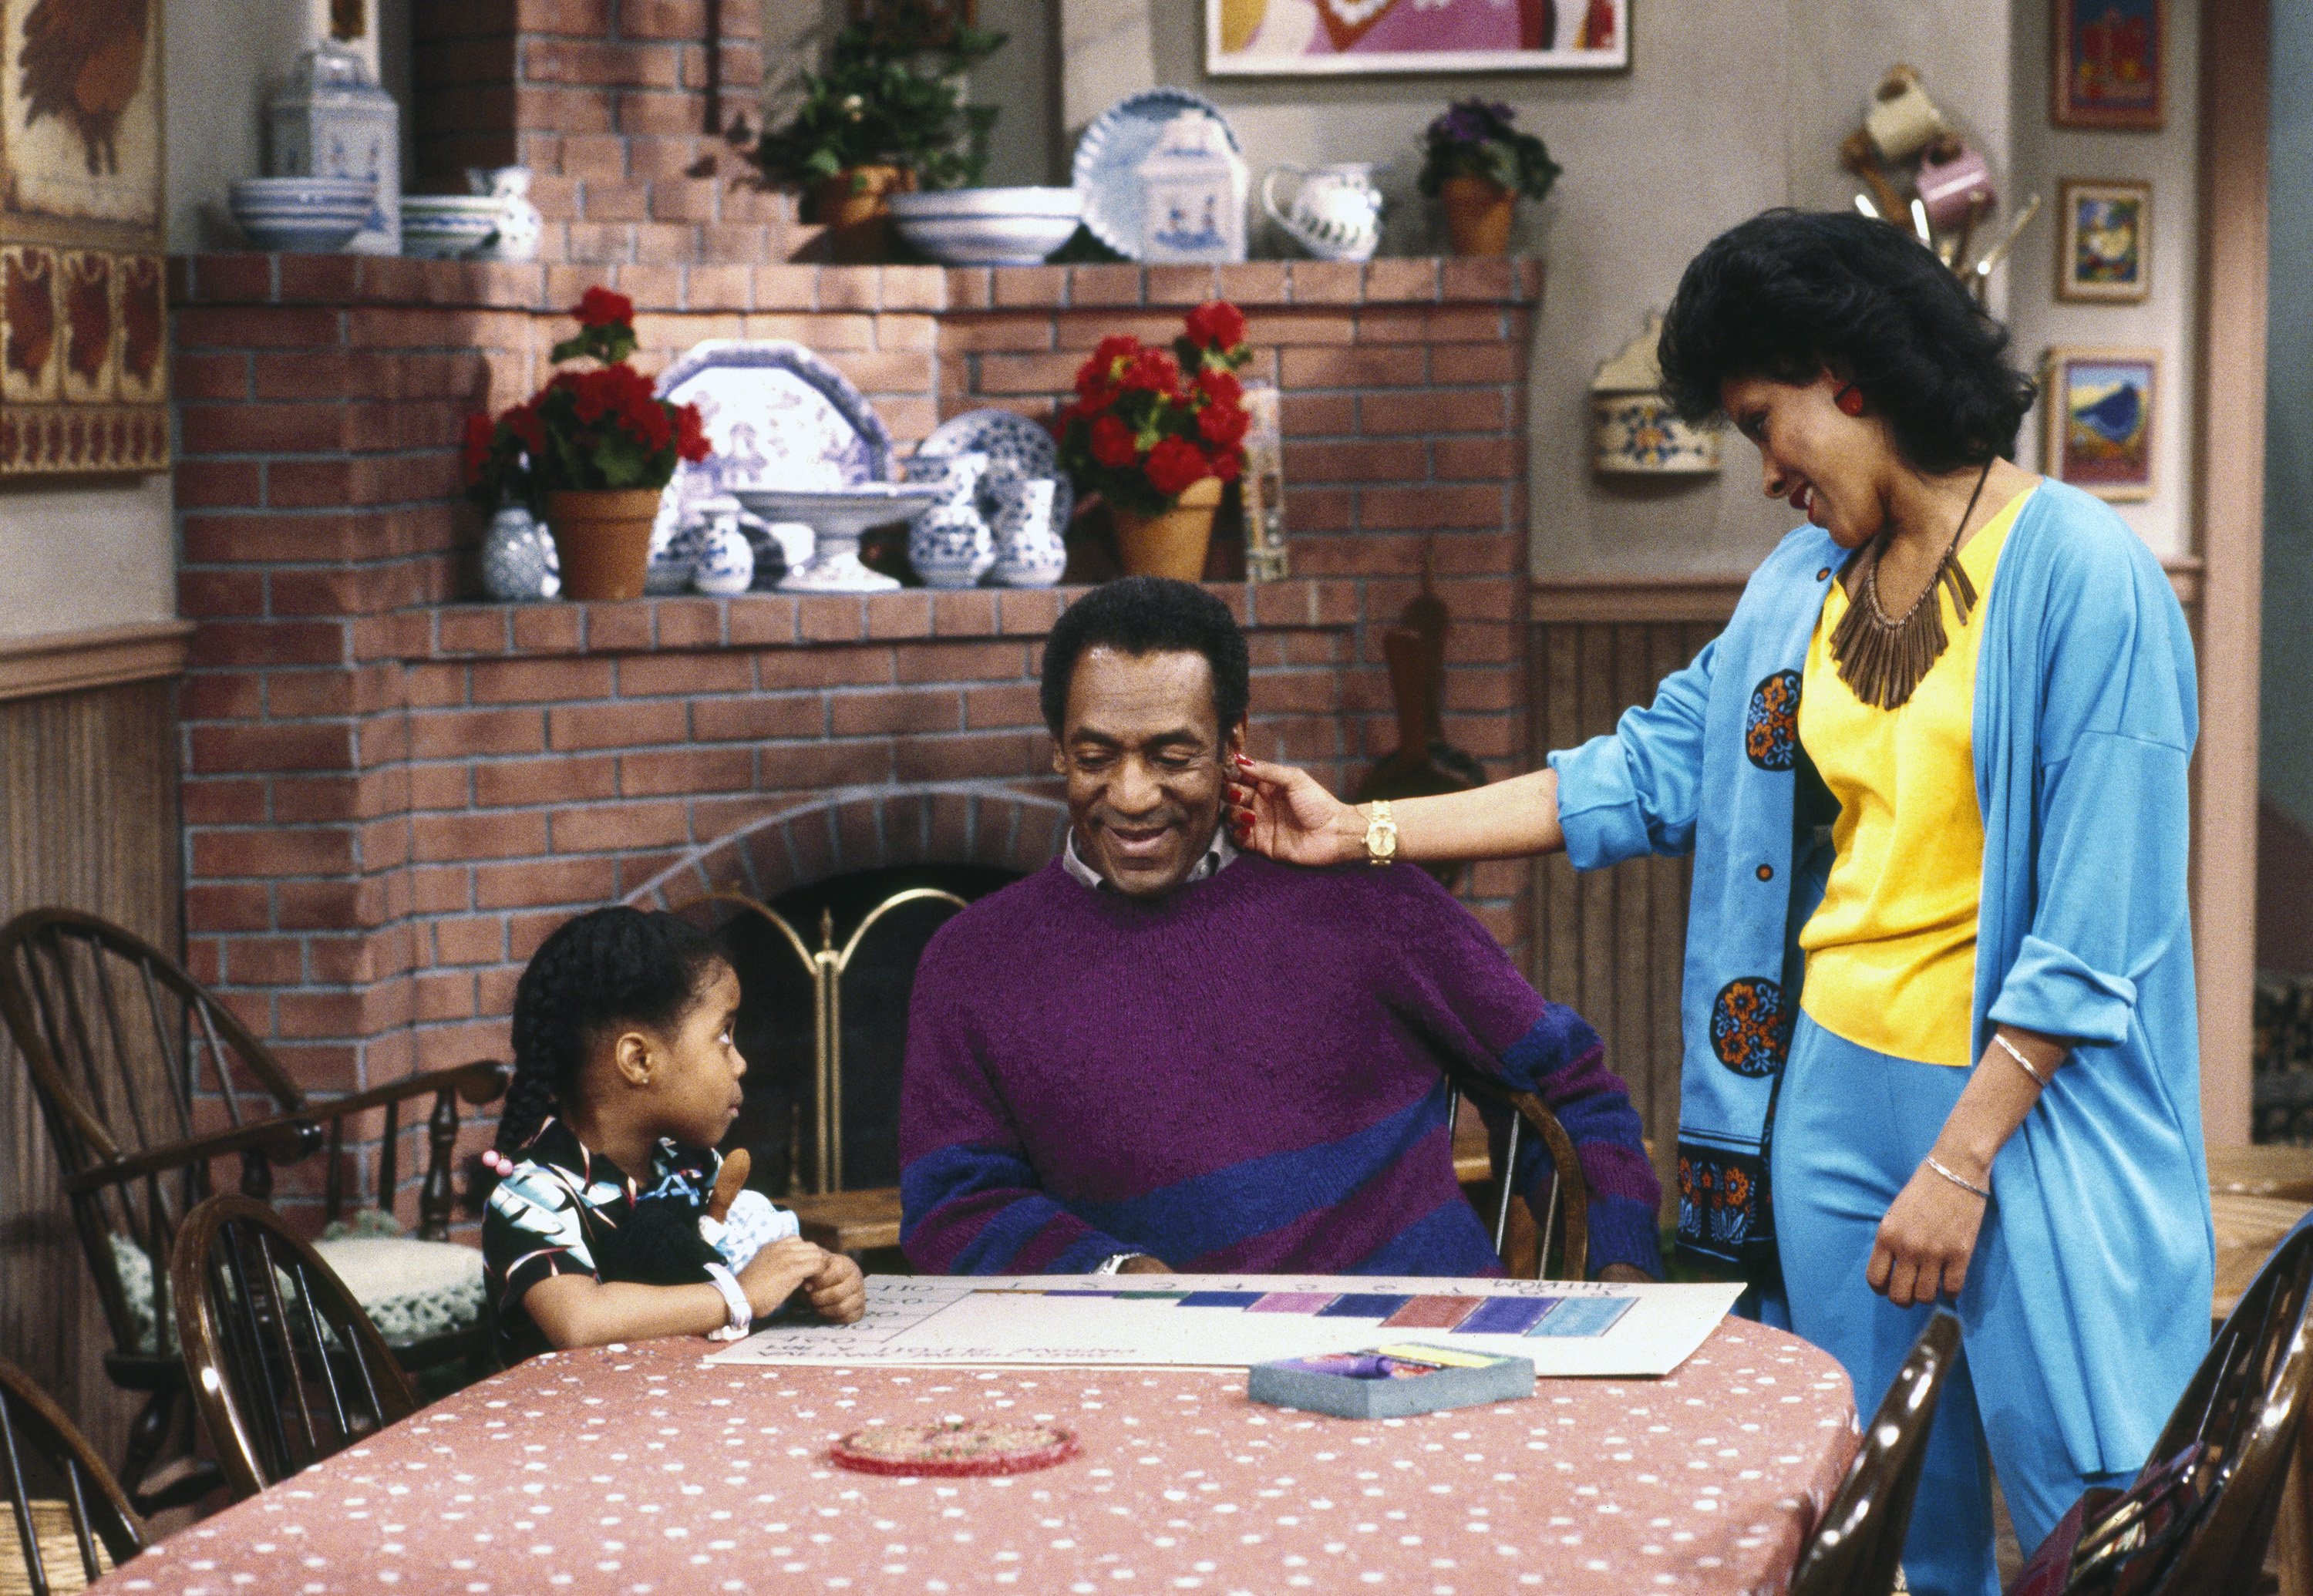 Keshia Knight Pulliam as Rudy Huxtable, Bill Cosby as Dr. Heathcliff 'Cliff' Huxtable, Phylicia Rashad as Clair Hanks Huxtable "The Cosby Show" | Photo: GettyImages